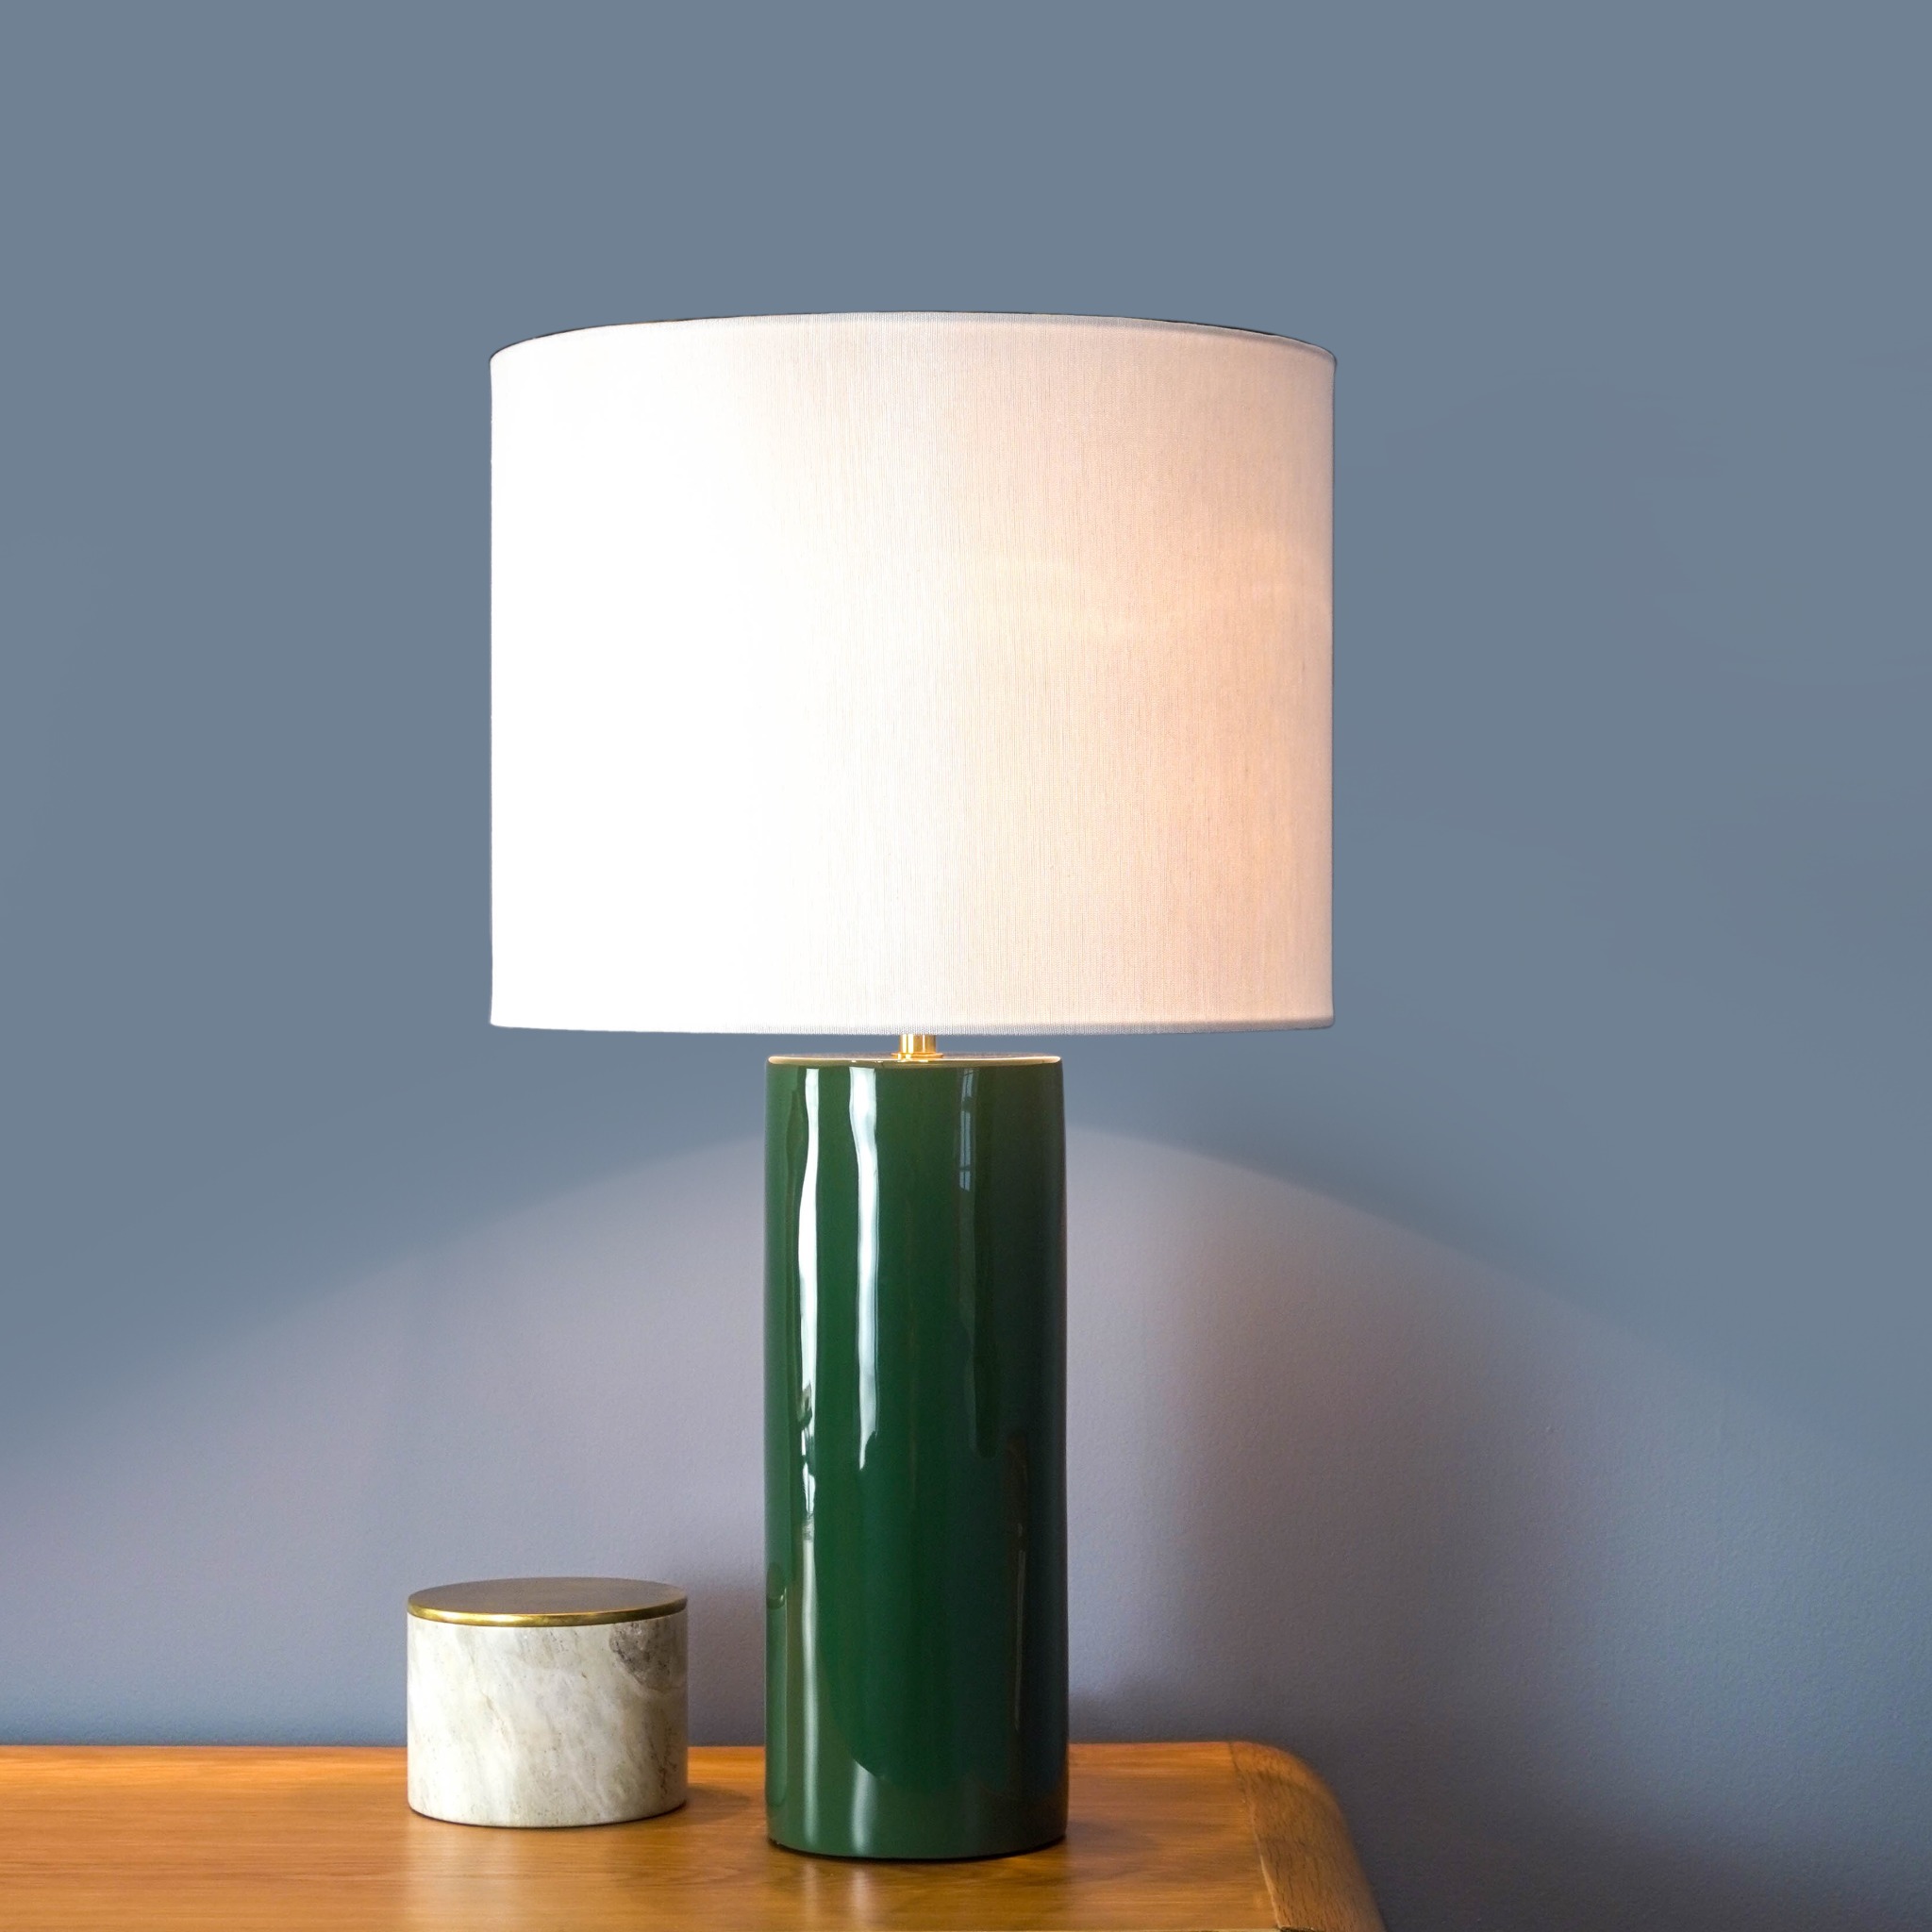 Lacquer Table Lamp Green – IN THE MOOD SAIGON